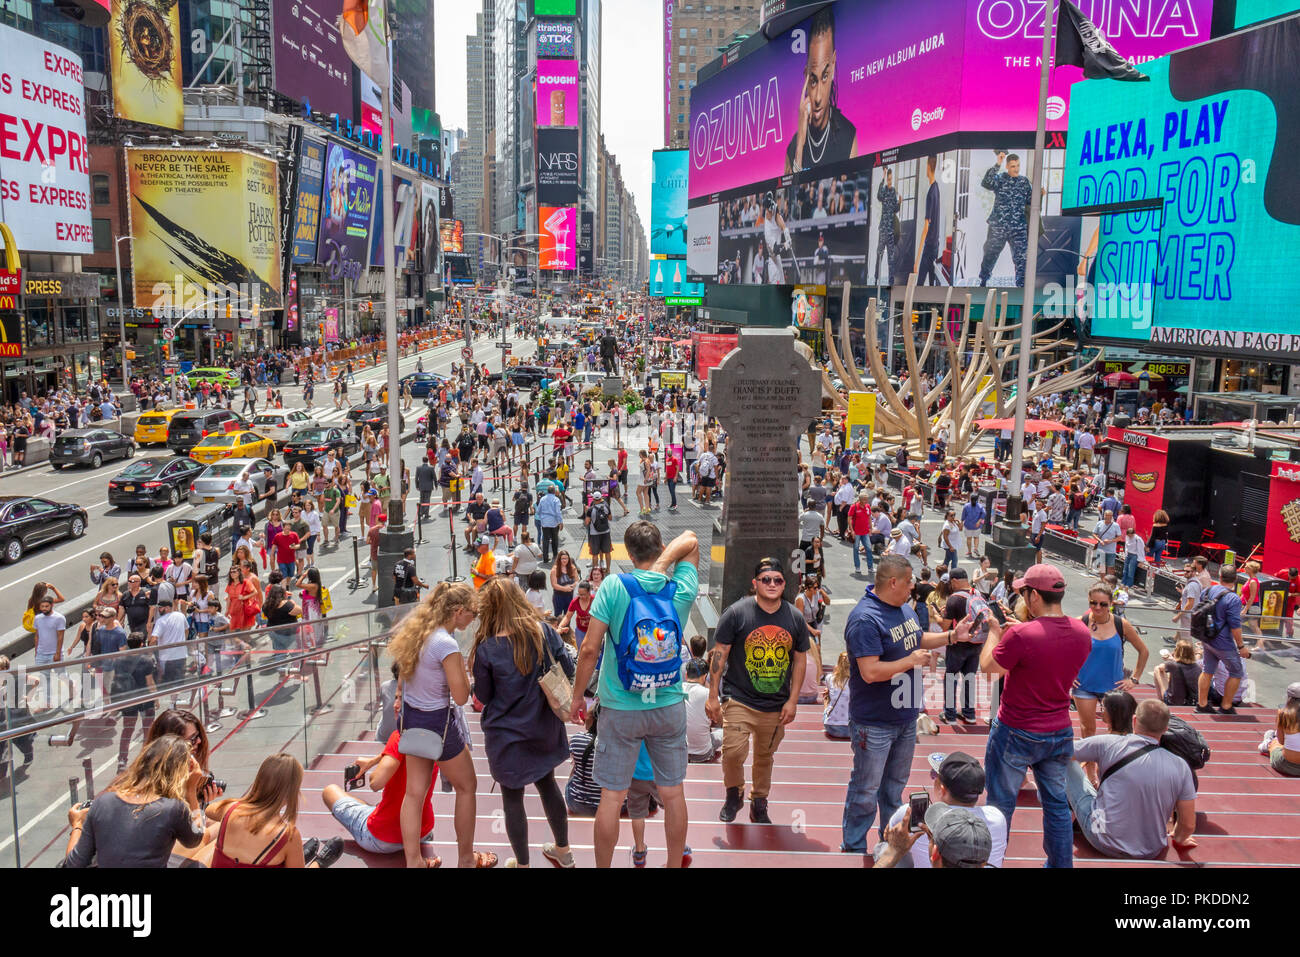 Visitors and tourists enjoying themselves at Times Square, 42nd Street in Manhattan, New York City. Stock Photo